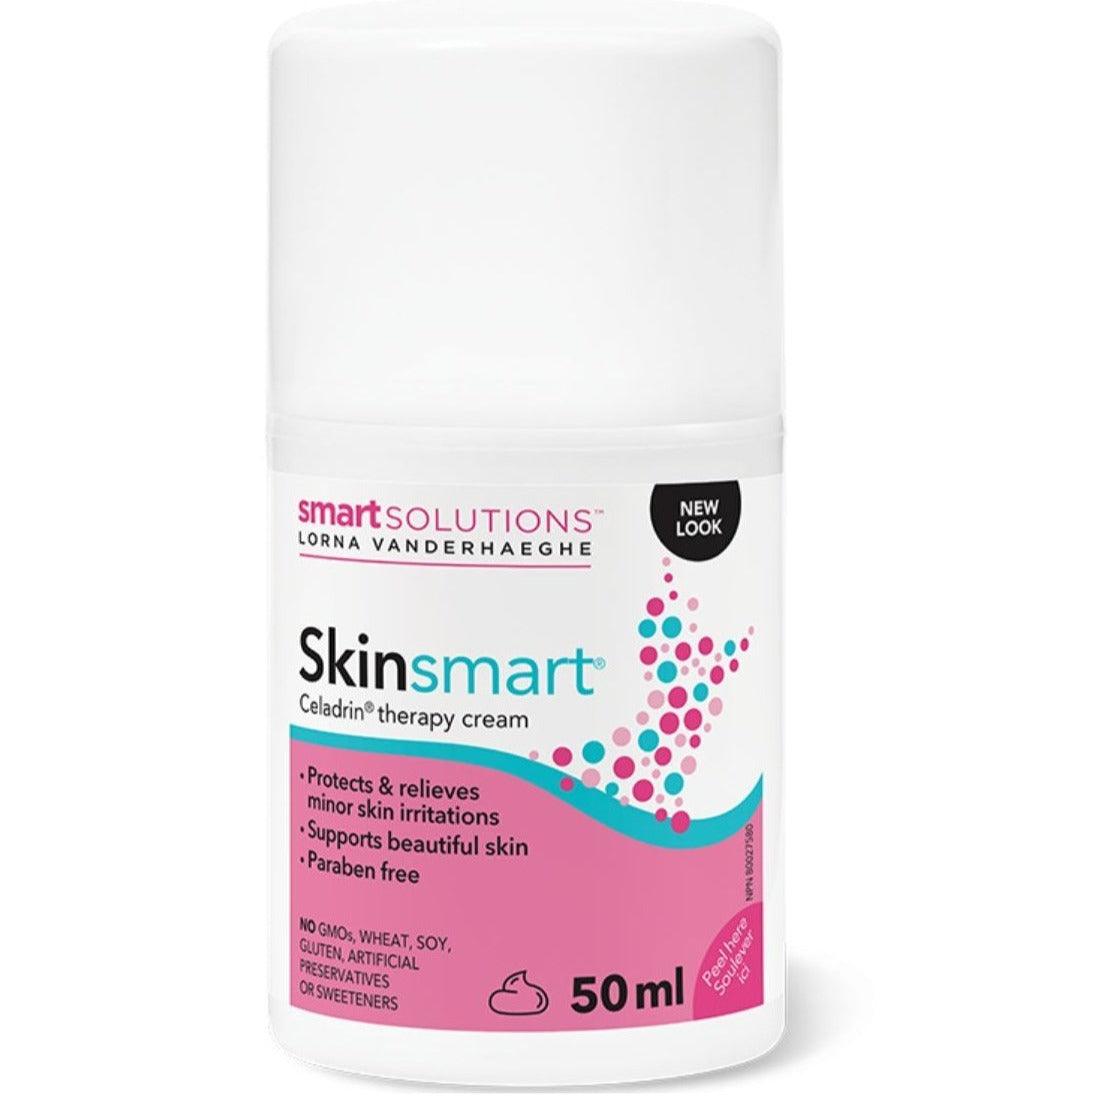 Smart Solutions Skinsmart Celadrin Therapy Cream 50mL Personal Care at Village Vitamin Store